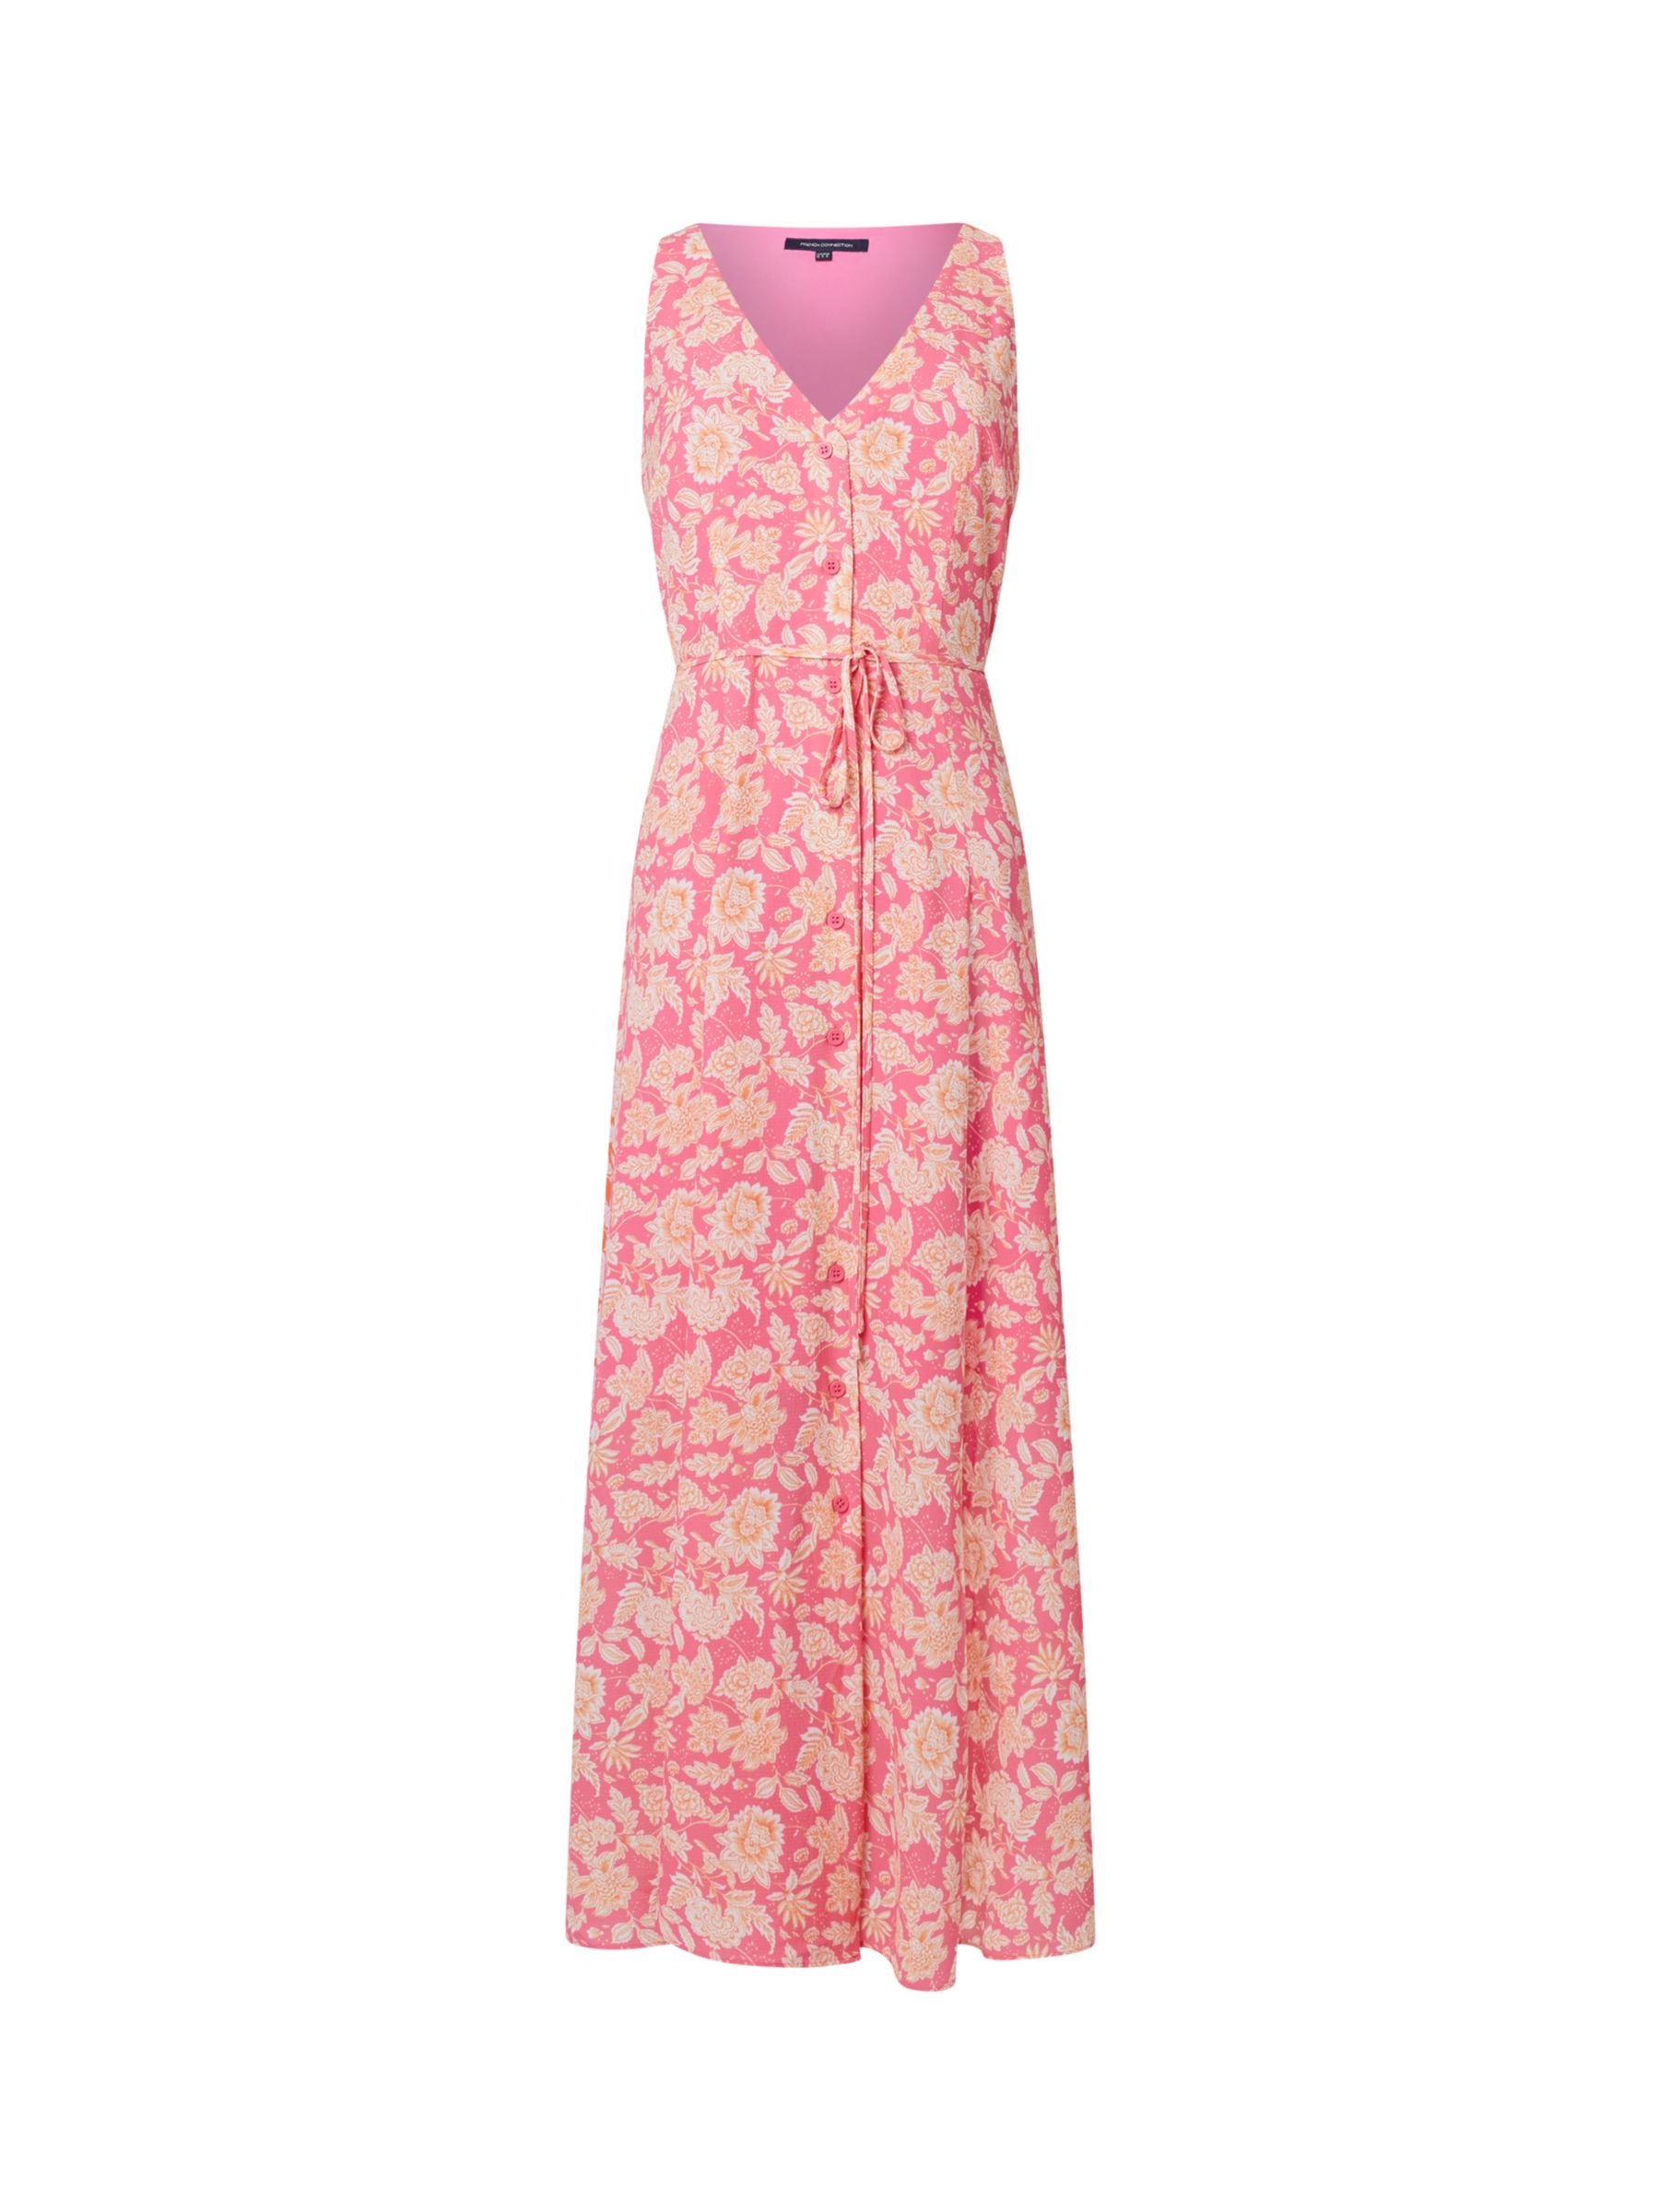 French Connection Cosette Floral Midi Dress, Pink/Multi, 14